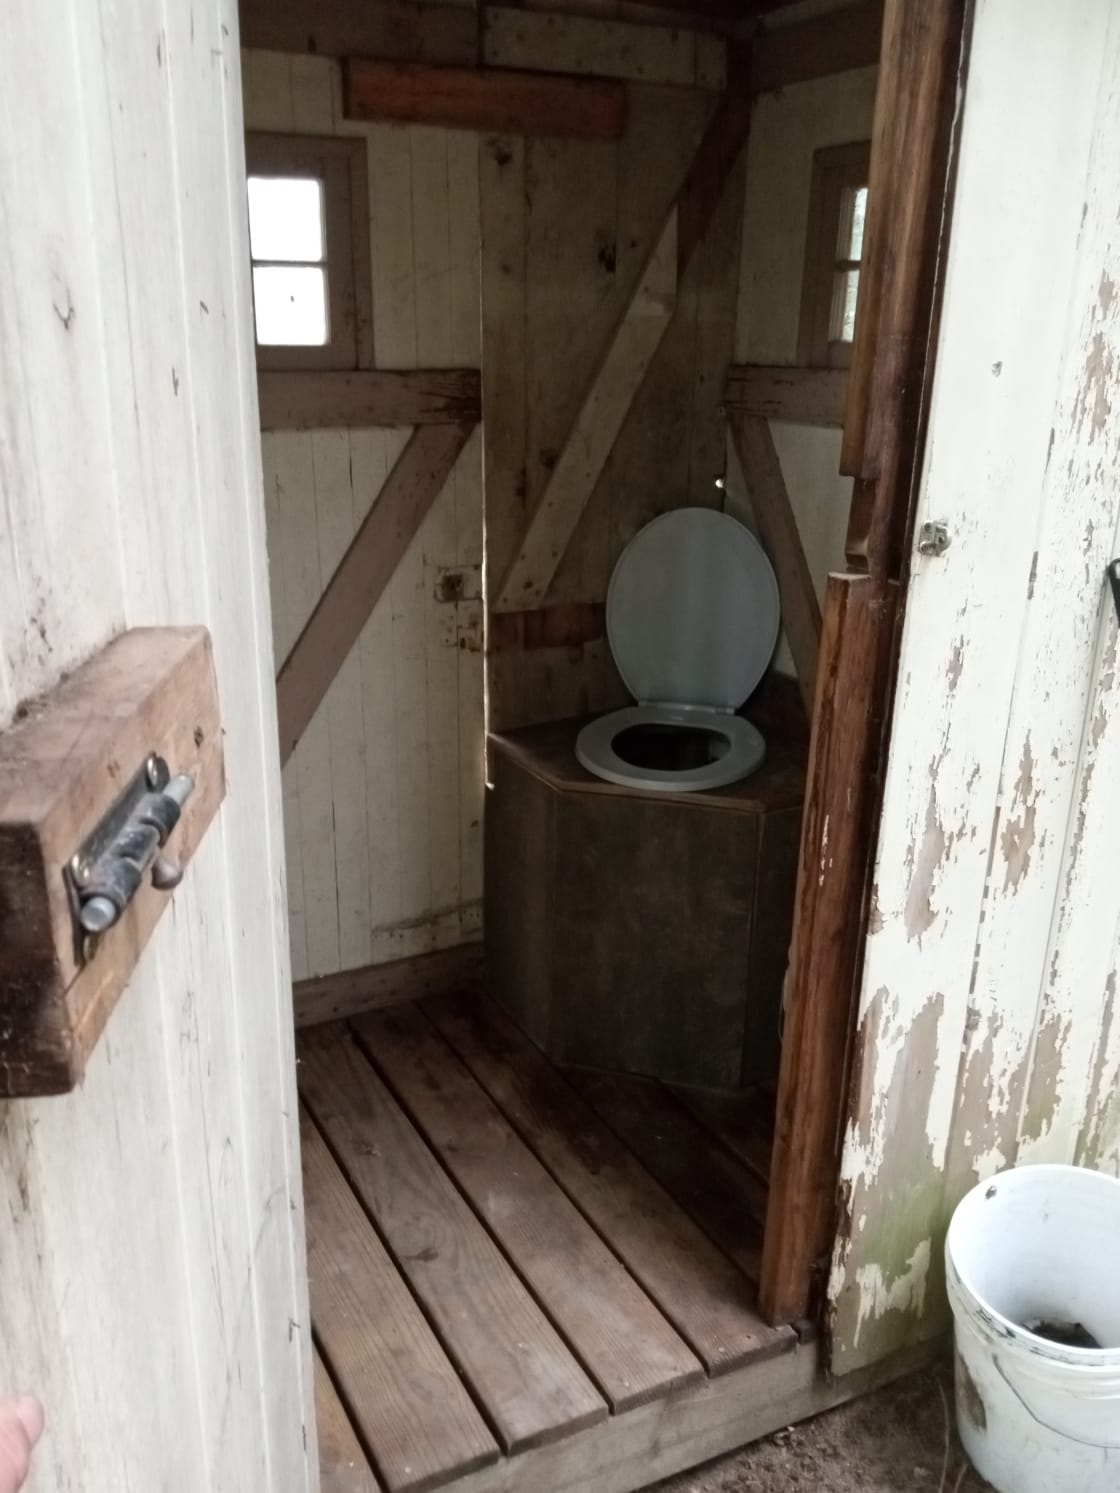 Outhouse at boondocks site#1